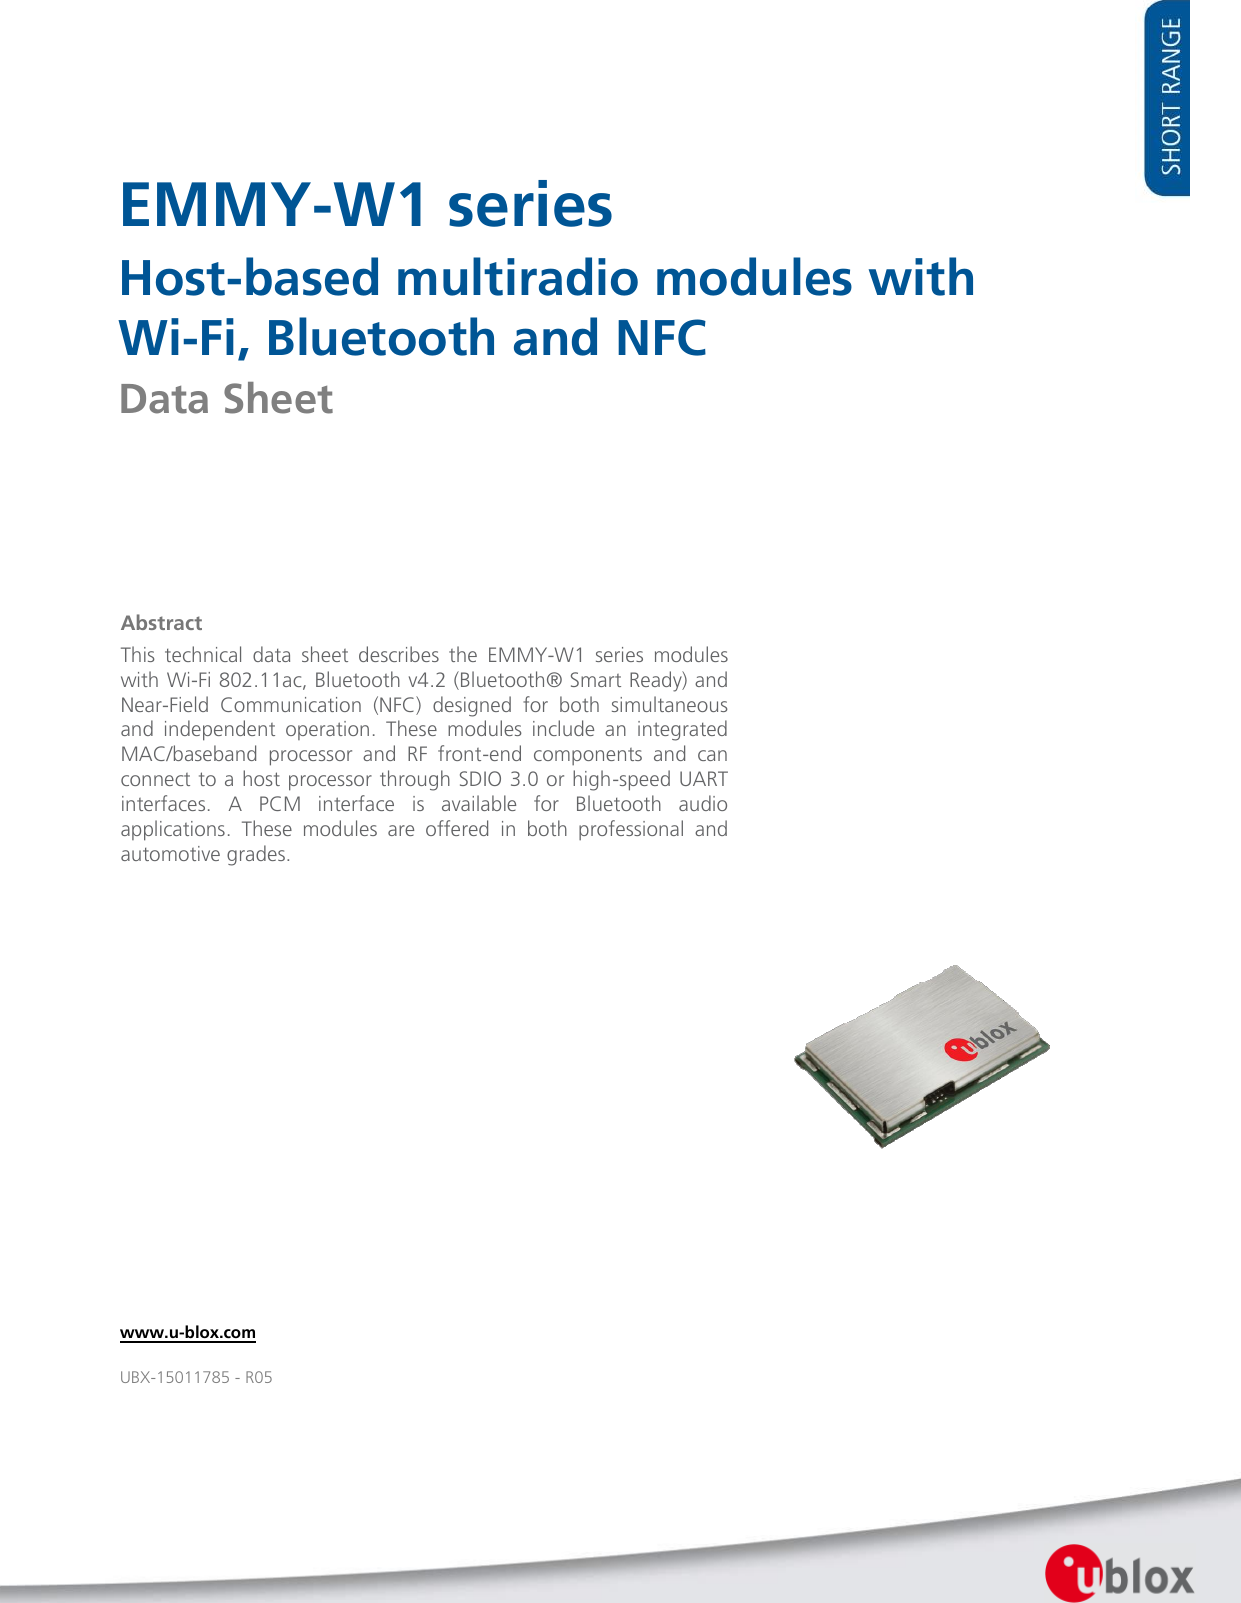   EMMY-W1 series Host-based multiradio modules with Wi-Fi, Bluetooth and NFC Data Sheet                www.u-blox.com UBX-15011785 - R05 Abstract This  technical  data  sheet  describes  the  EMMY-W1  series  modules with Wi-Fi 802.11ac, Bluetooth v4.2 (Bluetooth® Smart Ready) and Near-Field  Communication  (NFC)  designed  for  both  simultaneous and  independent  operation.  These  modules  include  an  integrated MAC/baseband  processor  and  RF  front-end  components  and  can connect to a host processor through SDIO 3.0 or high-speed UART interfaces.  A  PCM  interface  is  available  for  Bluetooth  audio applications.  These  modules  are  offered  in  both  professional  and automotive grades.  